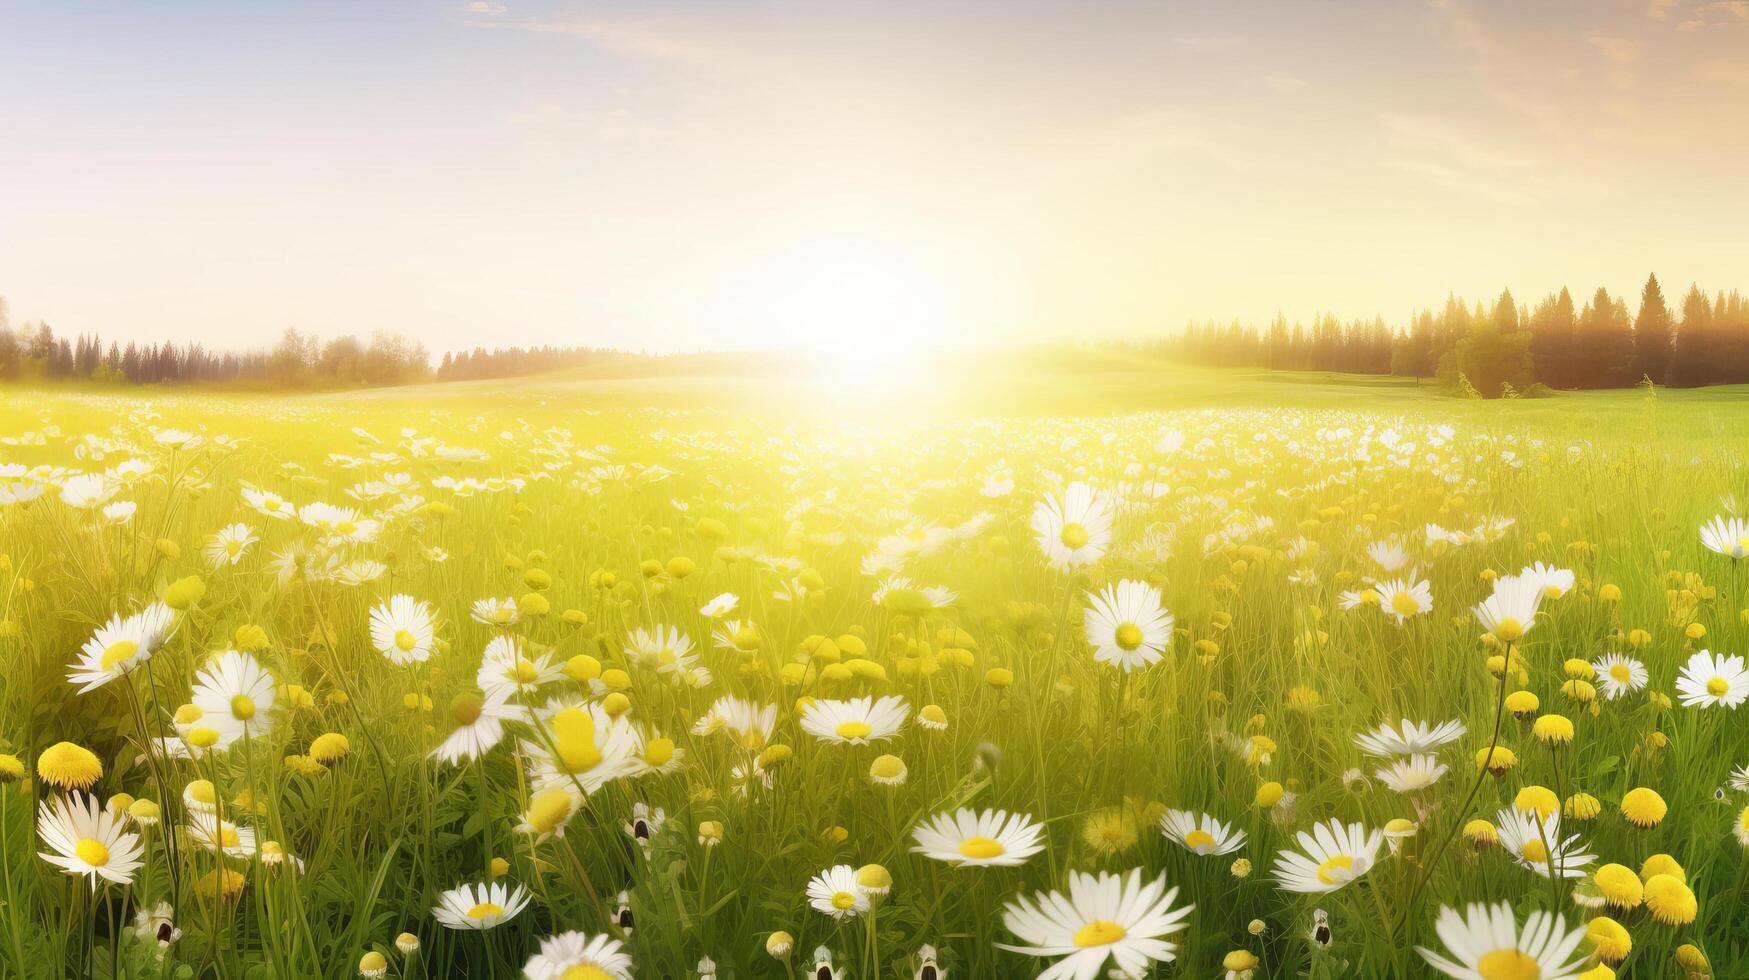 Summer field with daisy flowers. Illustration photo